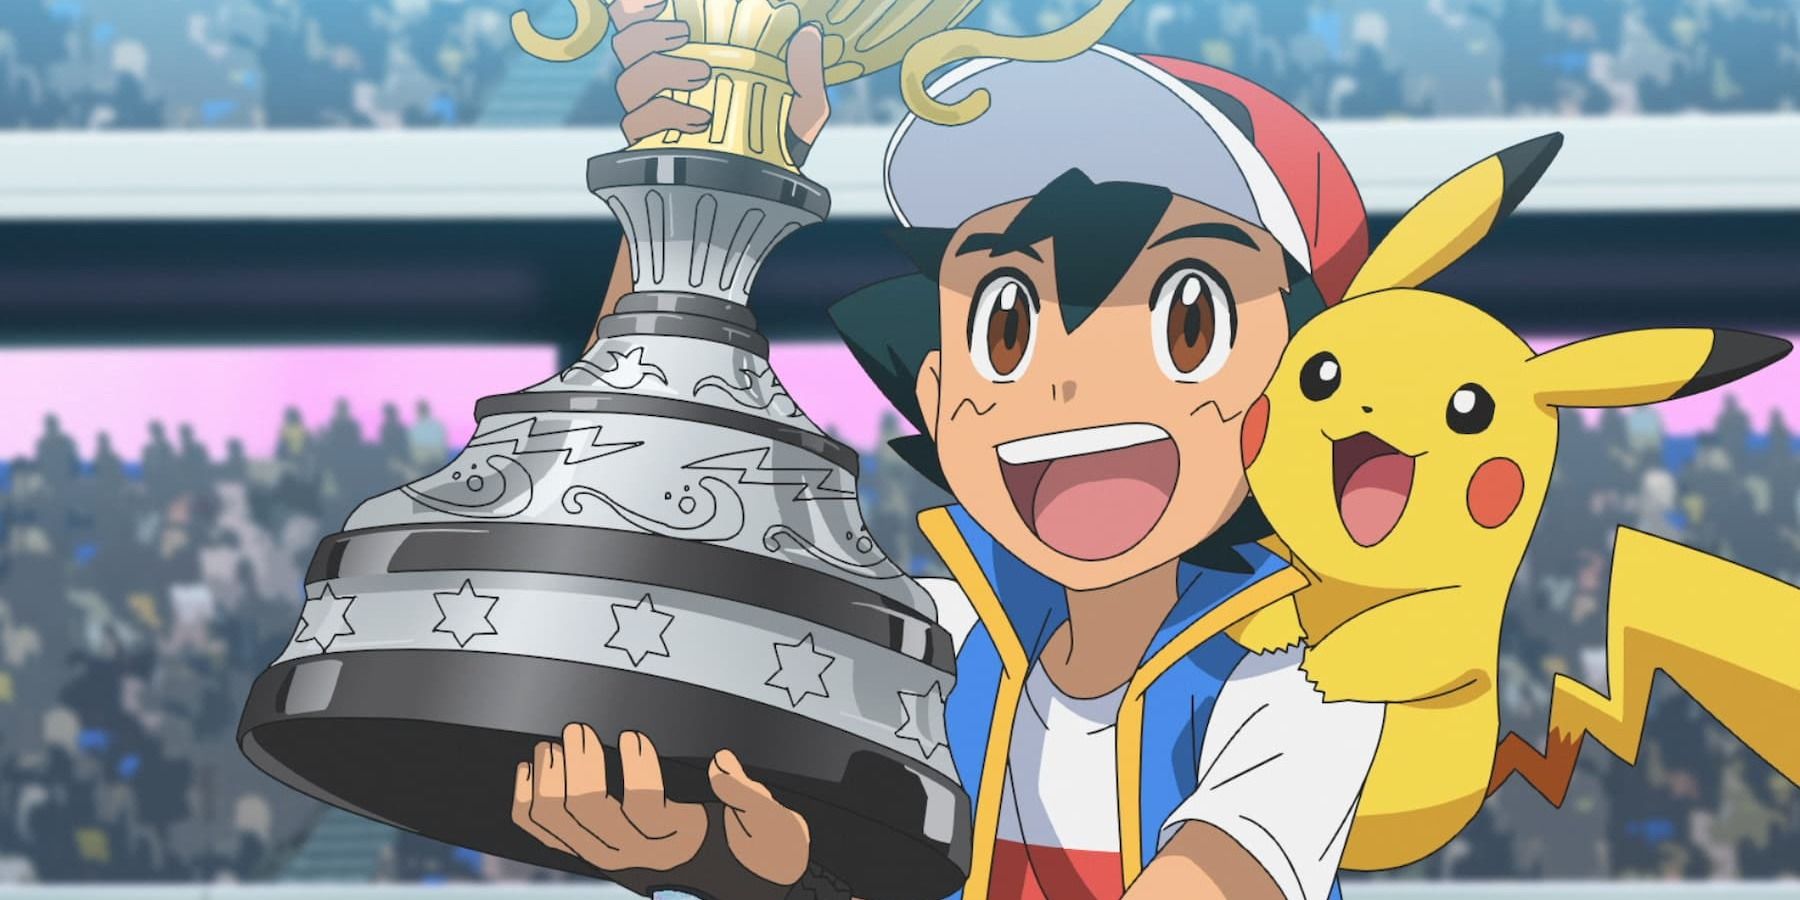 ash ketchum lifting the pokemon world champion trophy with pikachu on his shoulder